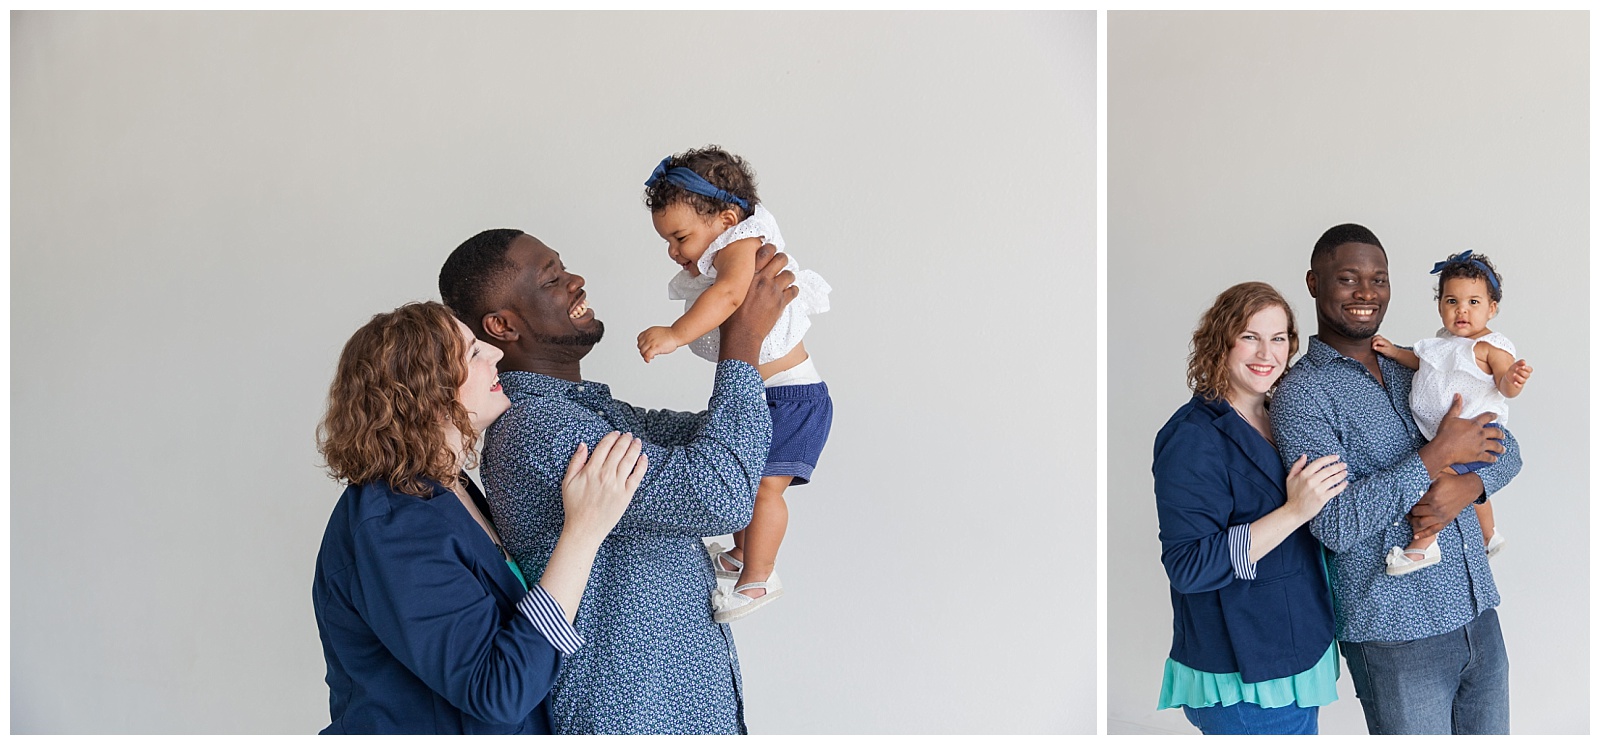 A cute and diverse family photoshoot at the lumen room in Dallas Texas by Alyssa Grace Photography